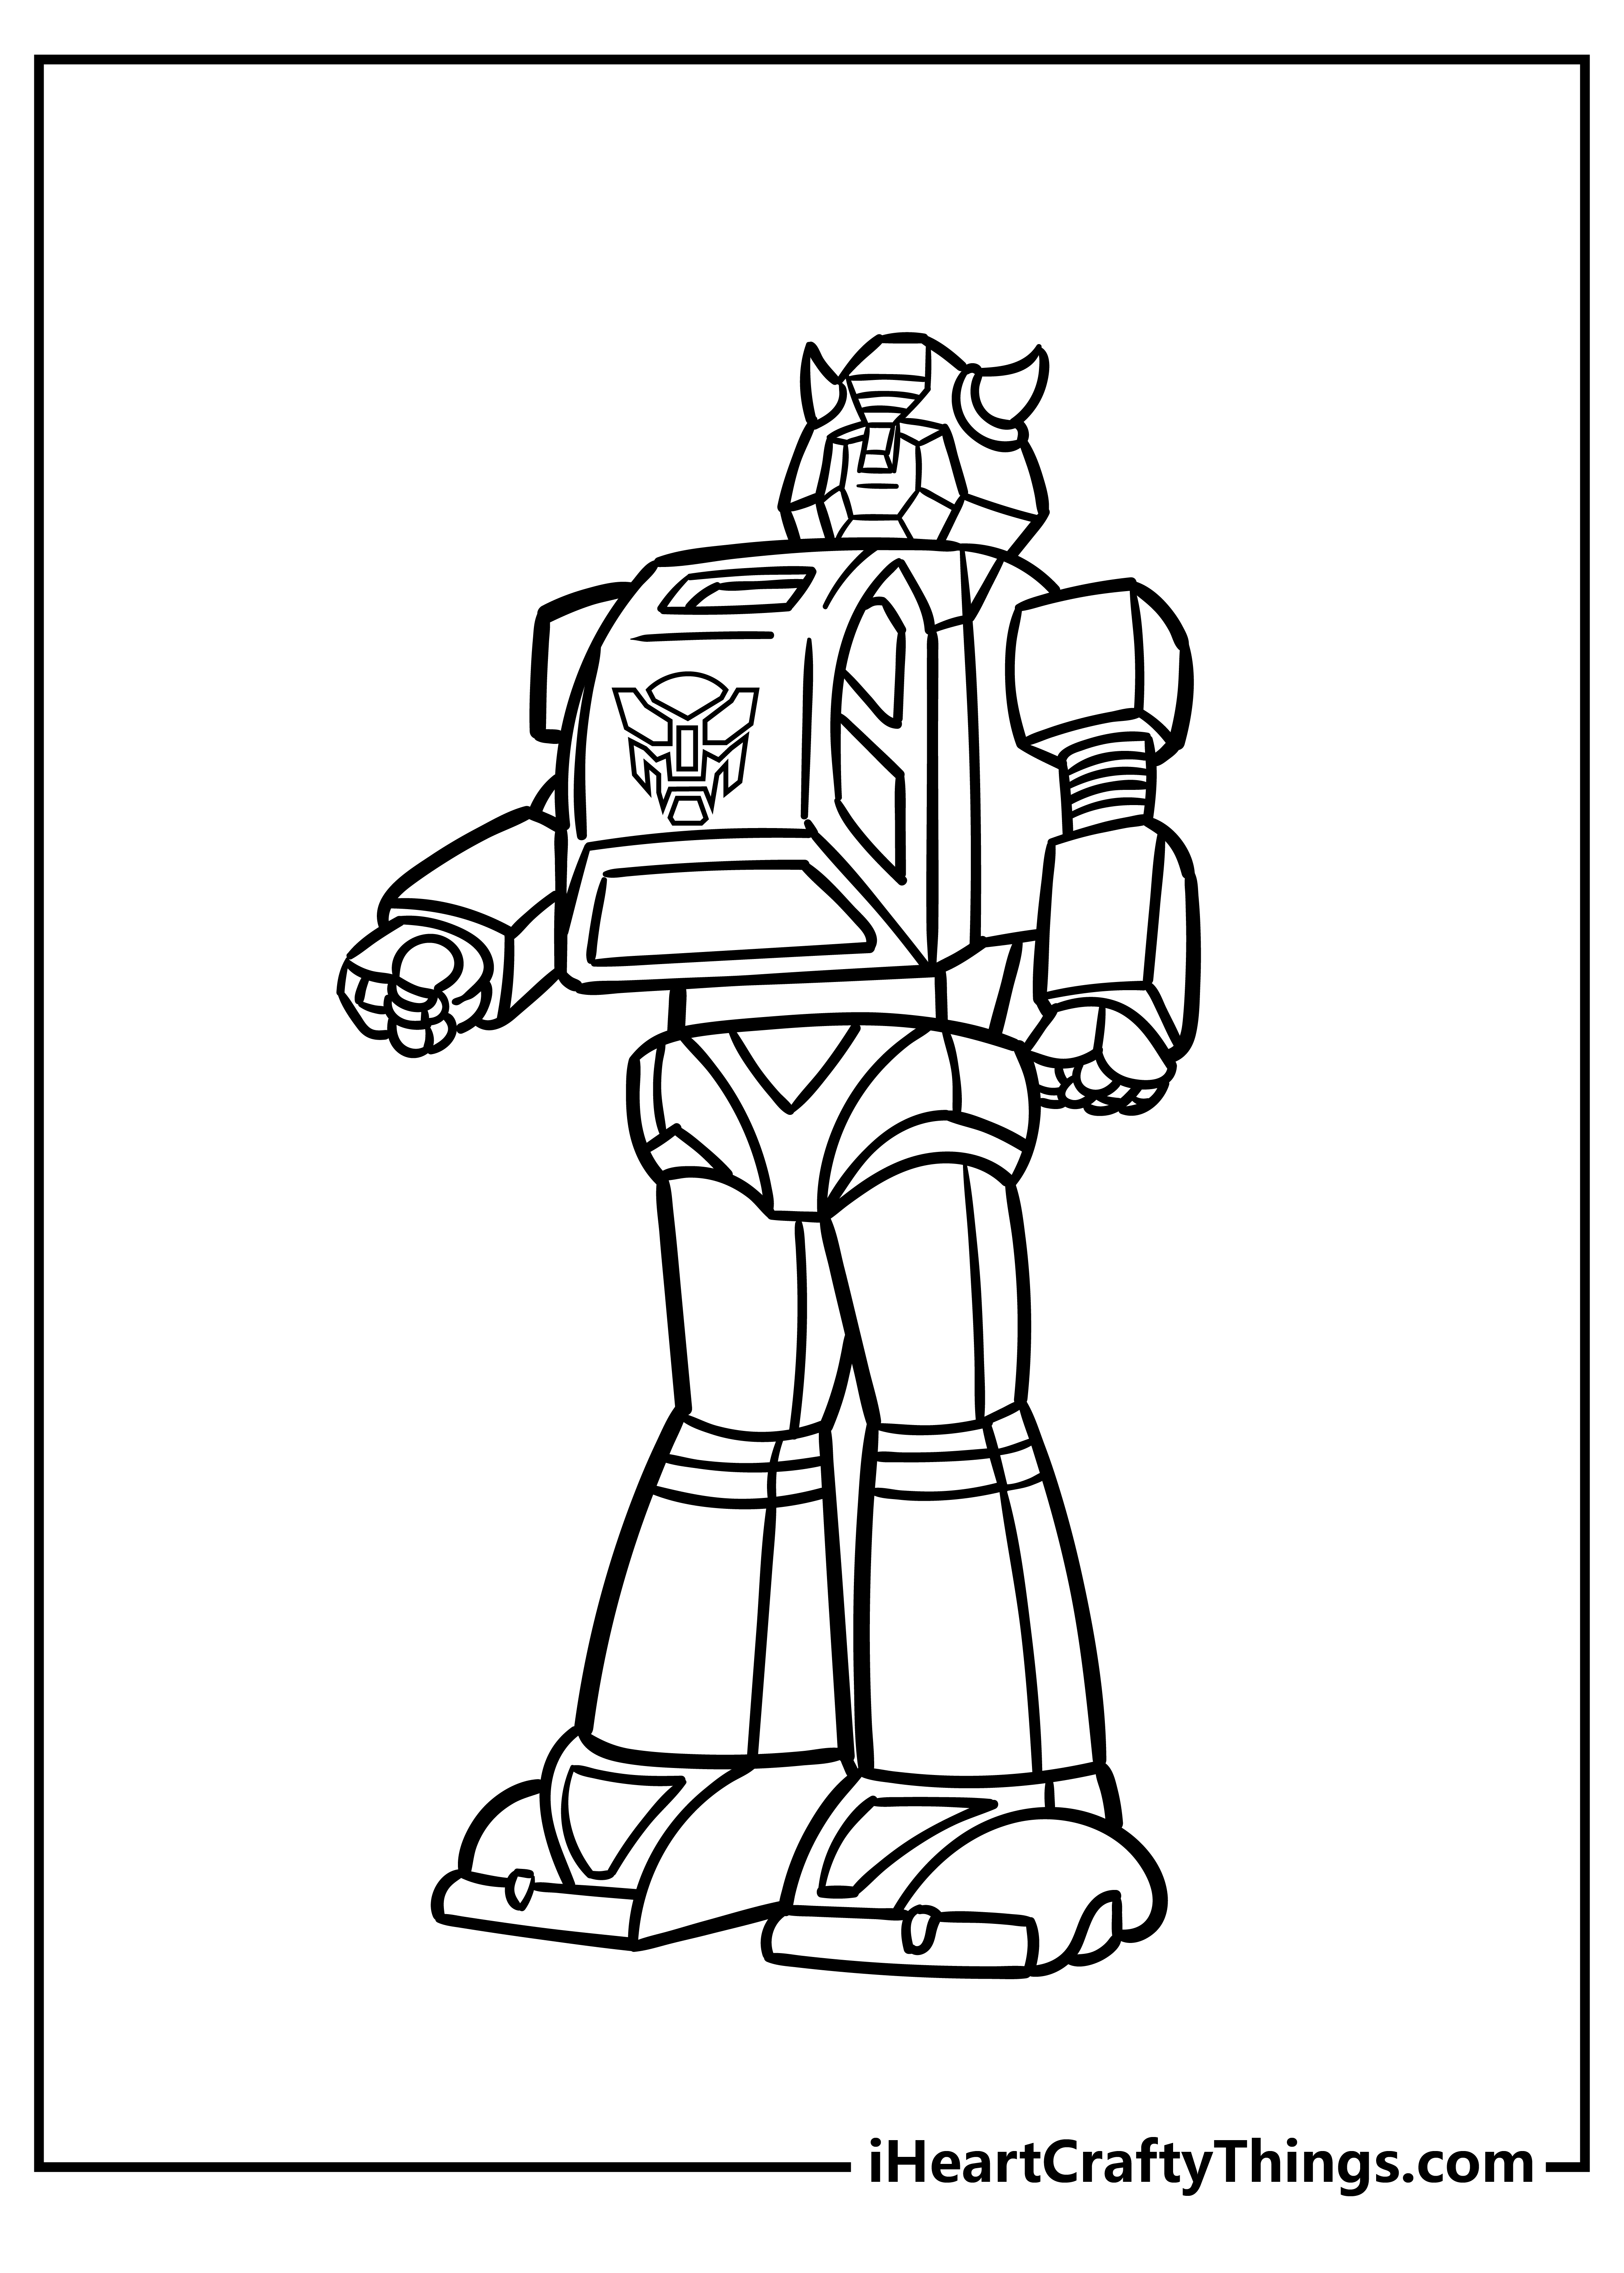 Bumblebee Coloring Book for adults free download